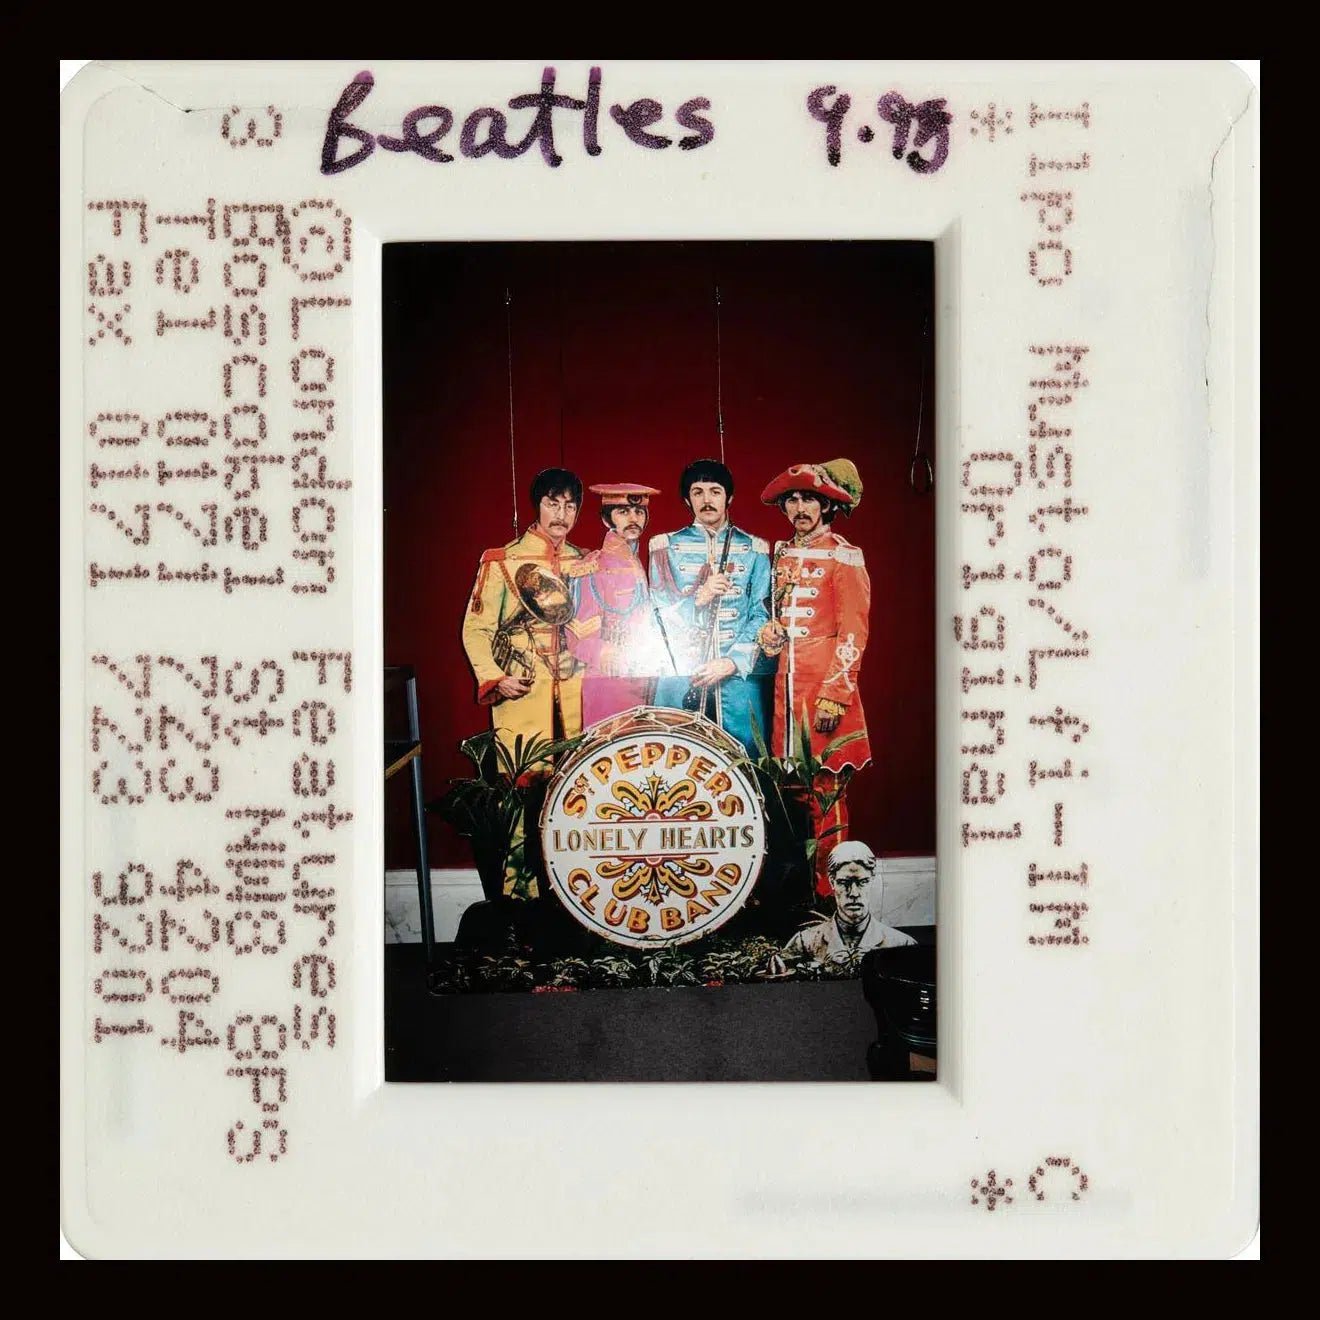 The Beatles - Slide 1, from The Wild Ones collection-PurePhoto